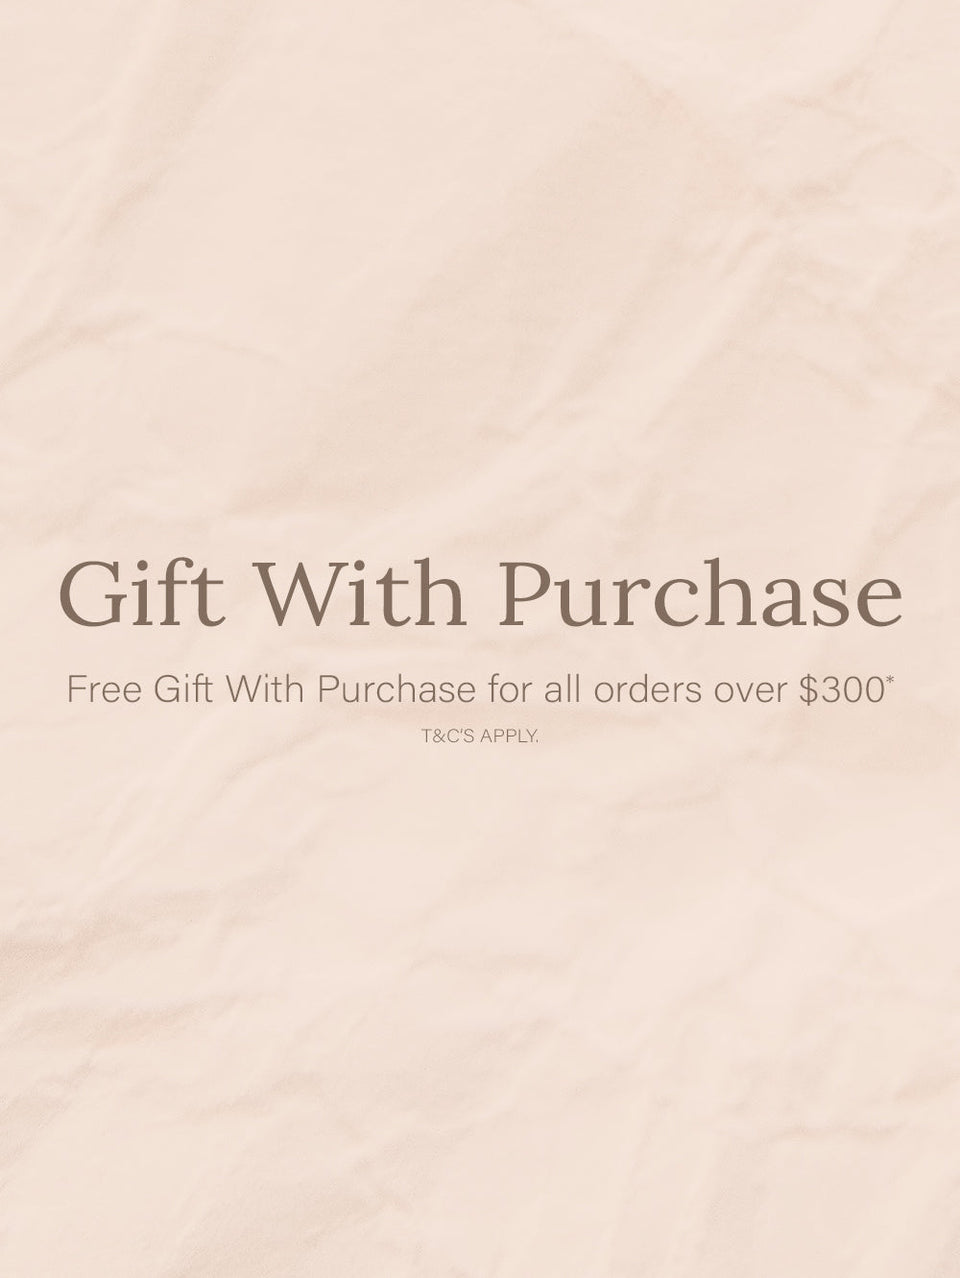 GIFT WITH PURCHASE (100% off)